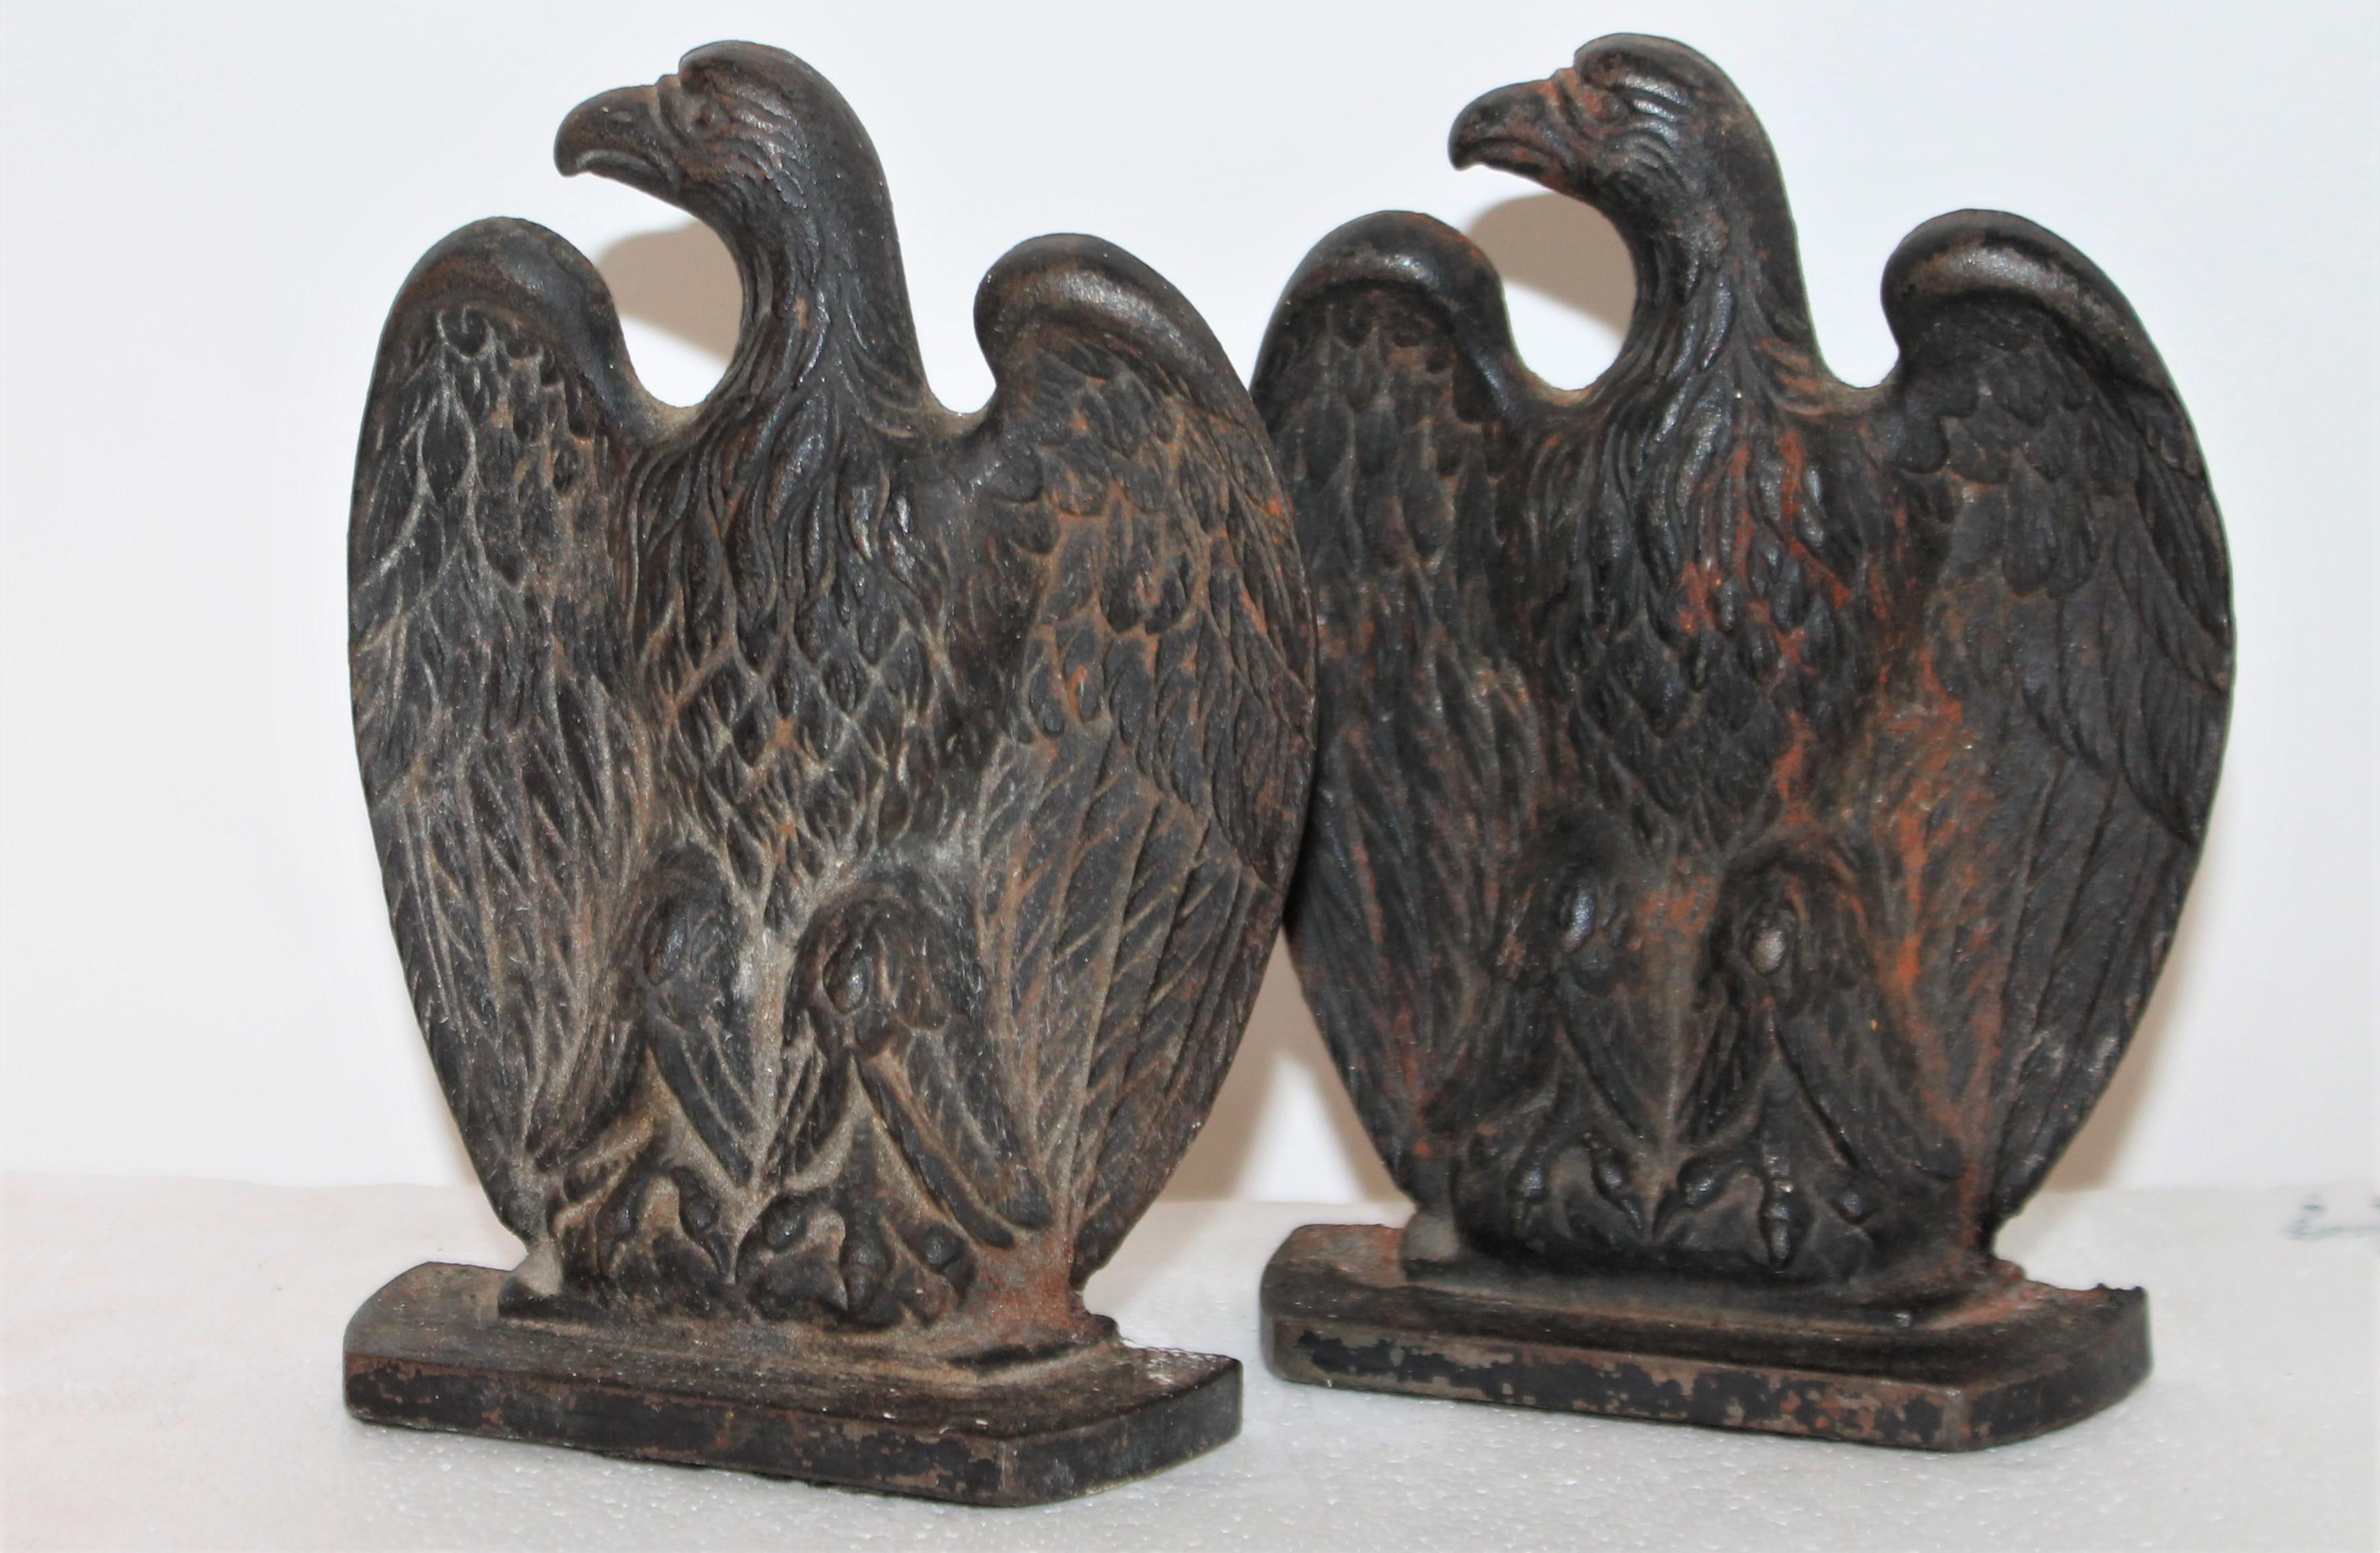 These fantastic early cast iron black painted bookends are in great condition and retain their original black painted surface.